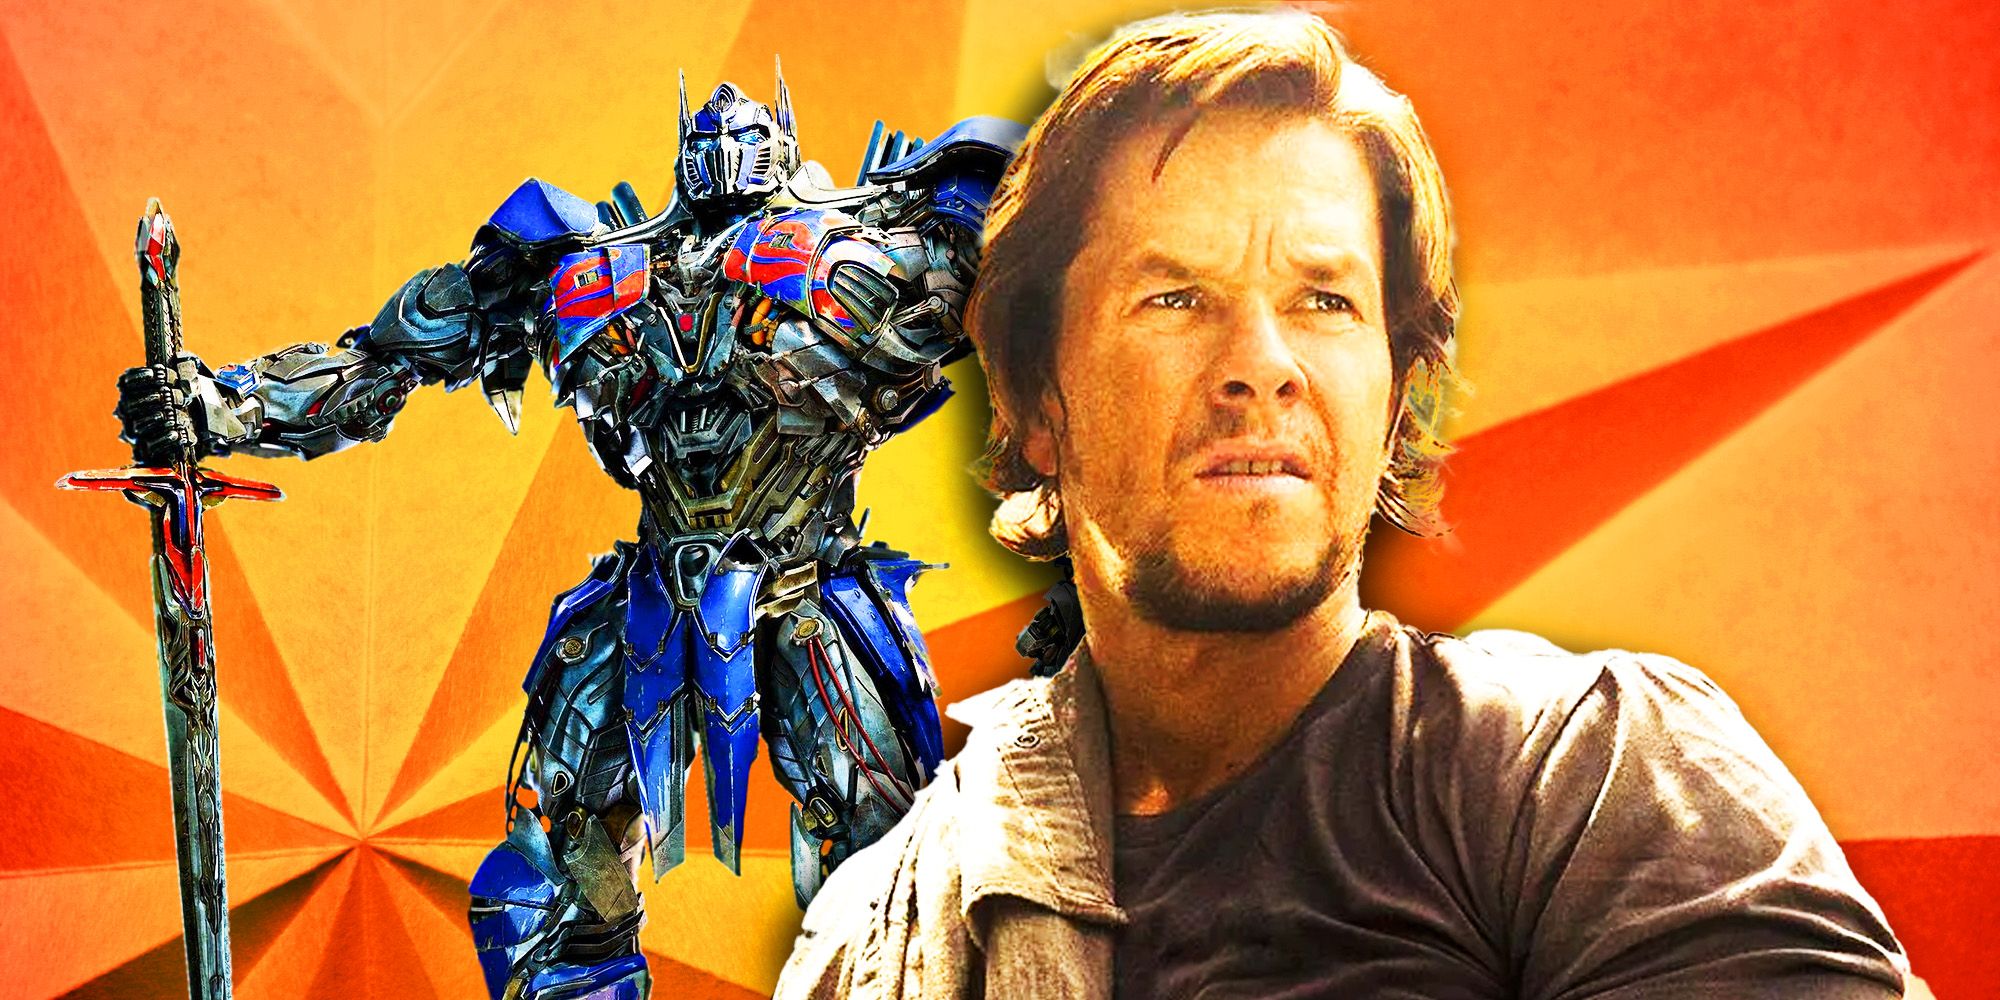 Optimus Prime and Mark Wahlberg from Transformers The Last Knight